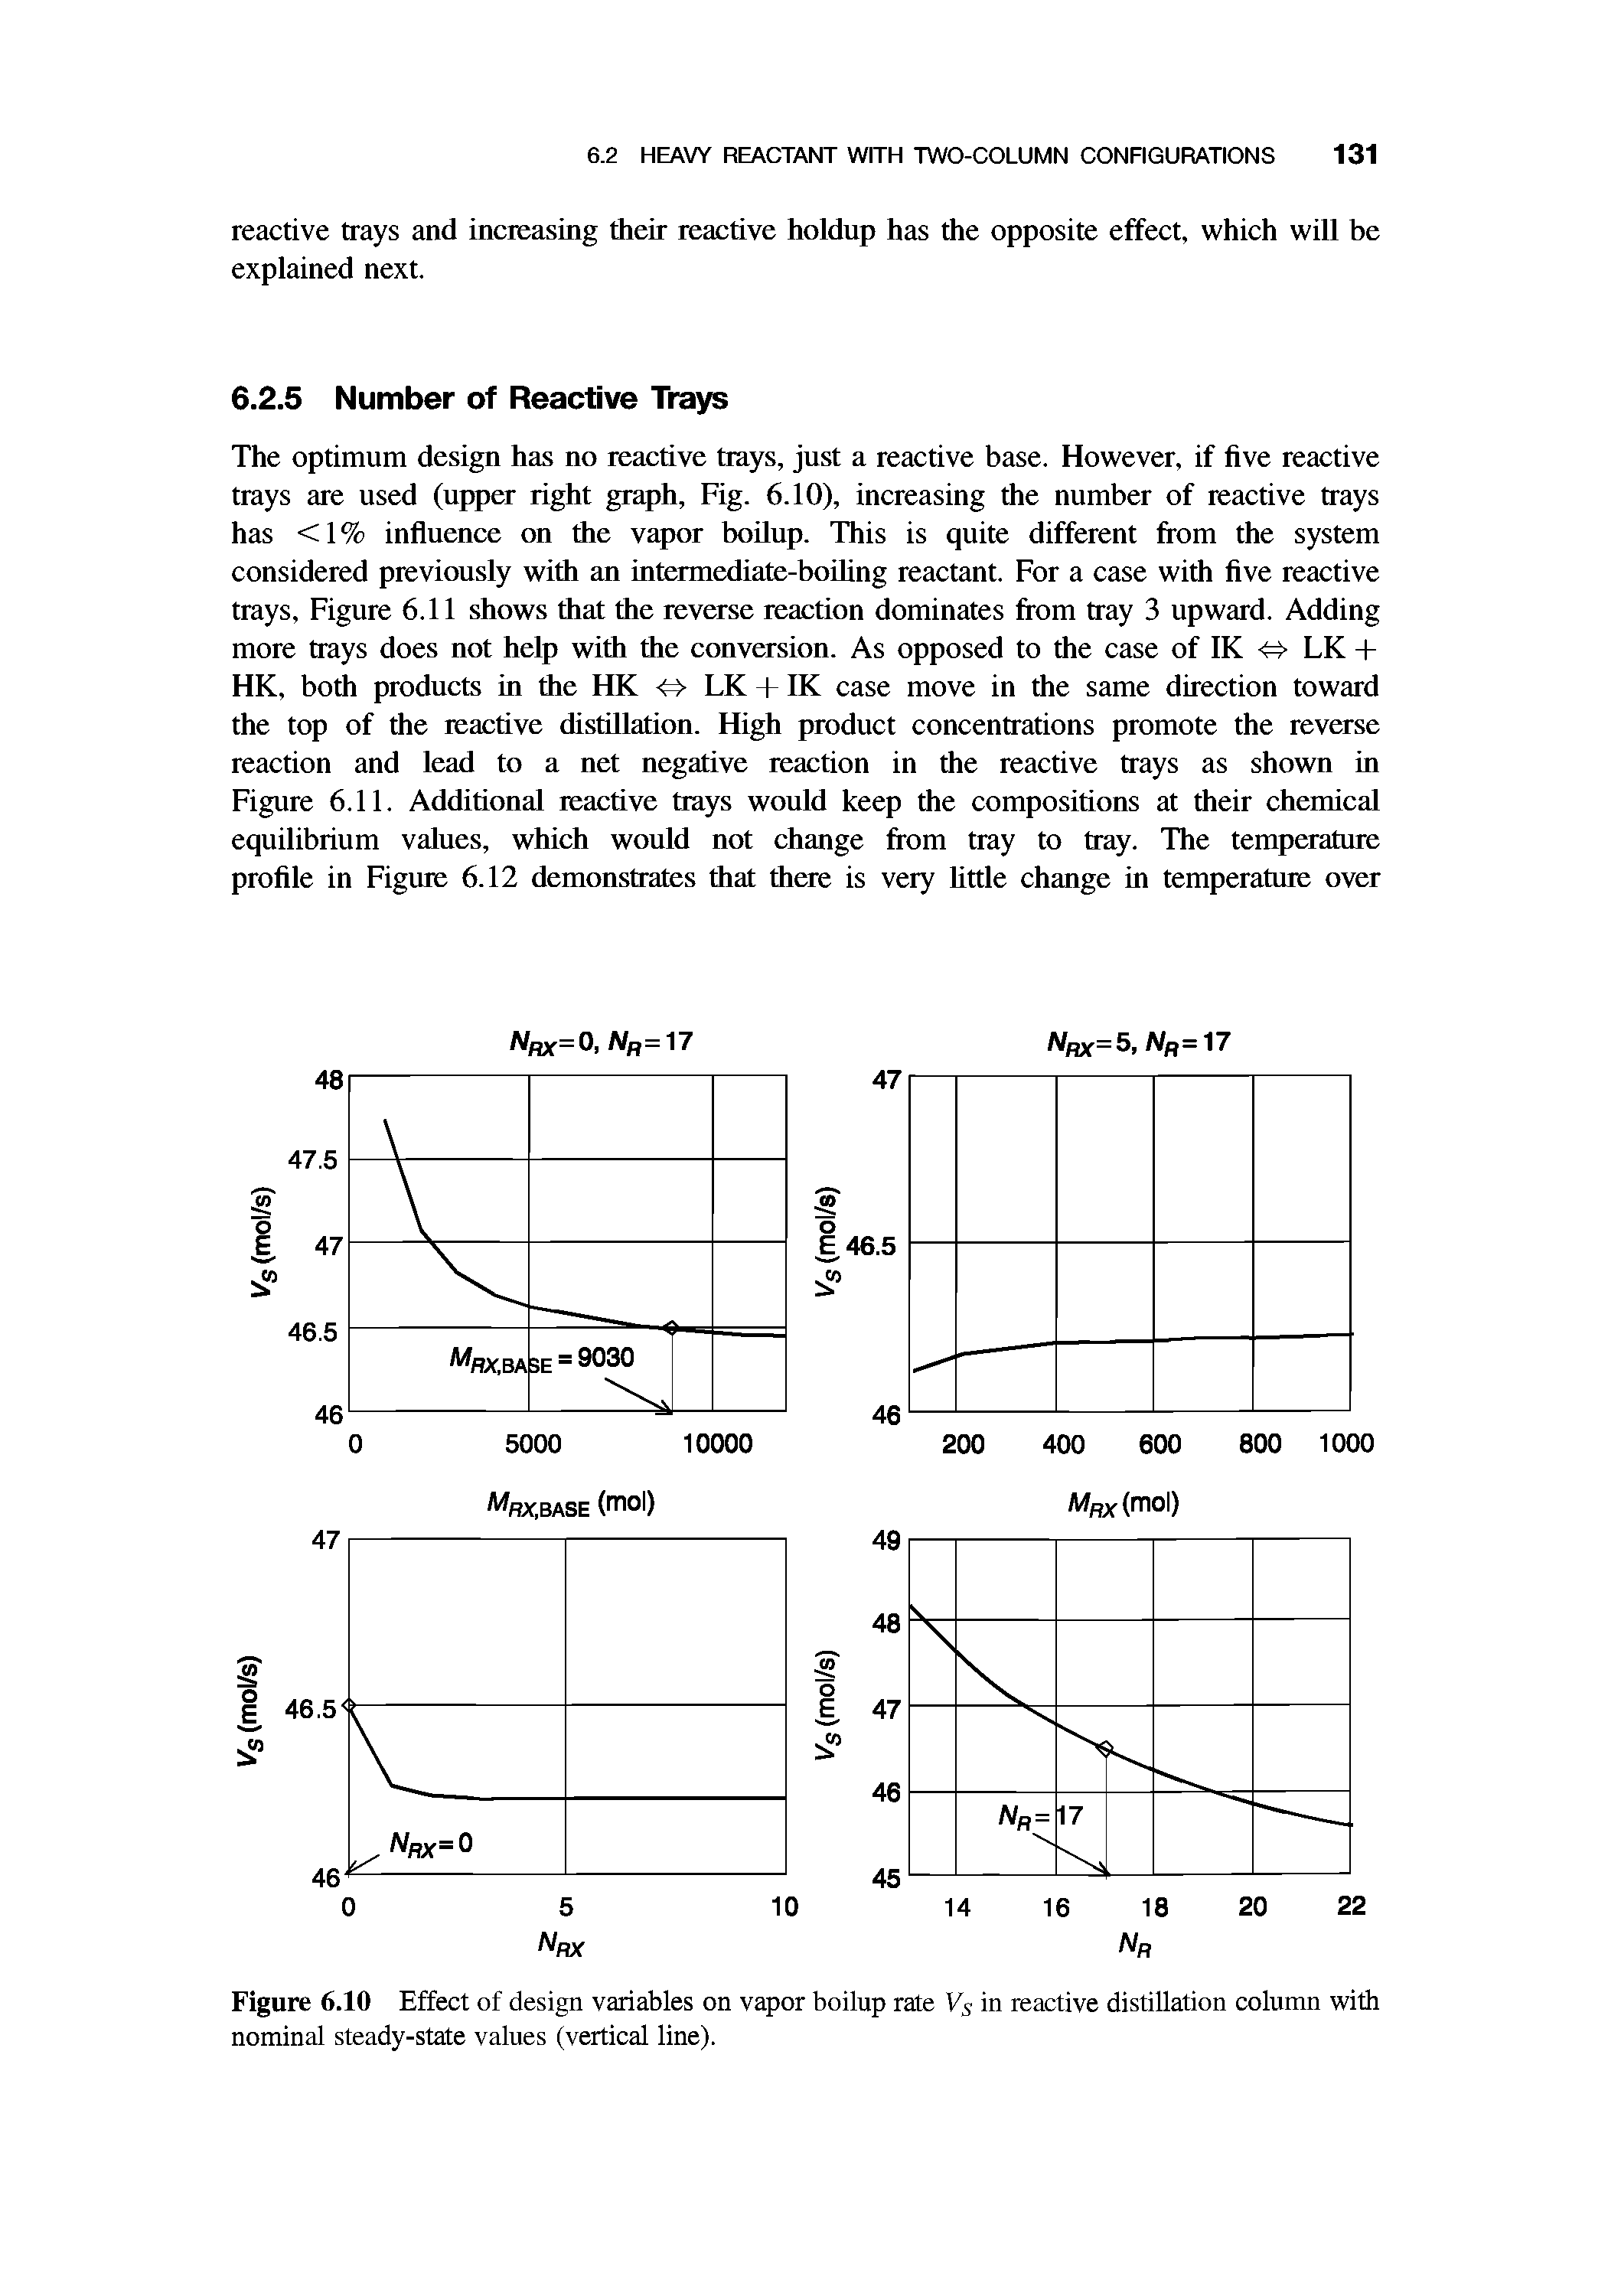 Figure 6.10 Effect of design variables on vapor boilup rate Vg in reactive distillation column with nominal steady-state values (vertical line).